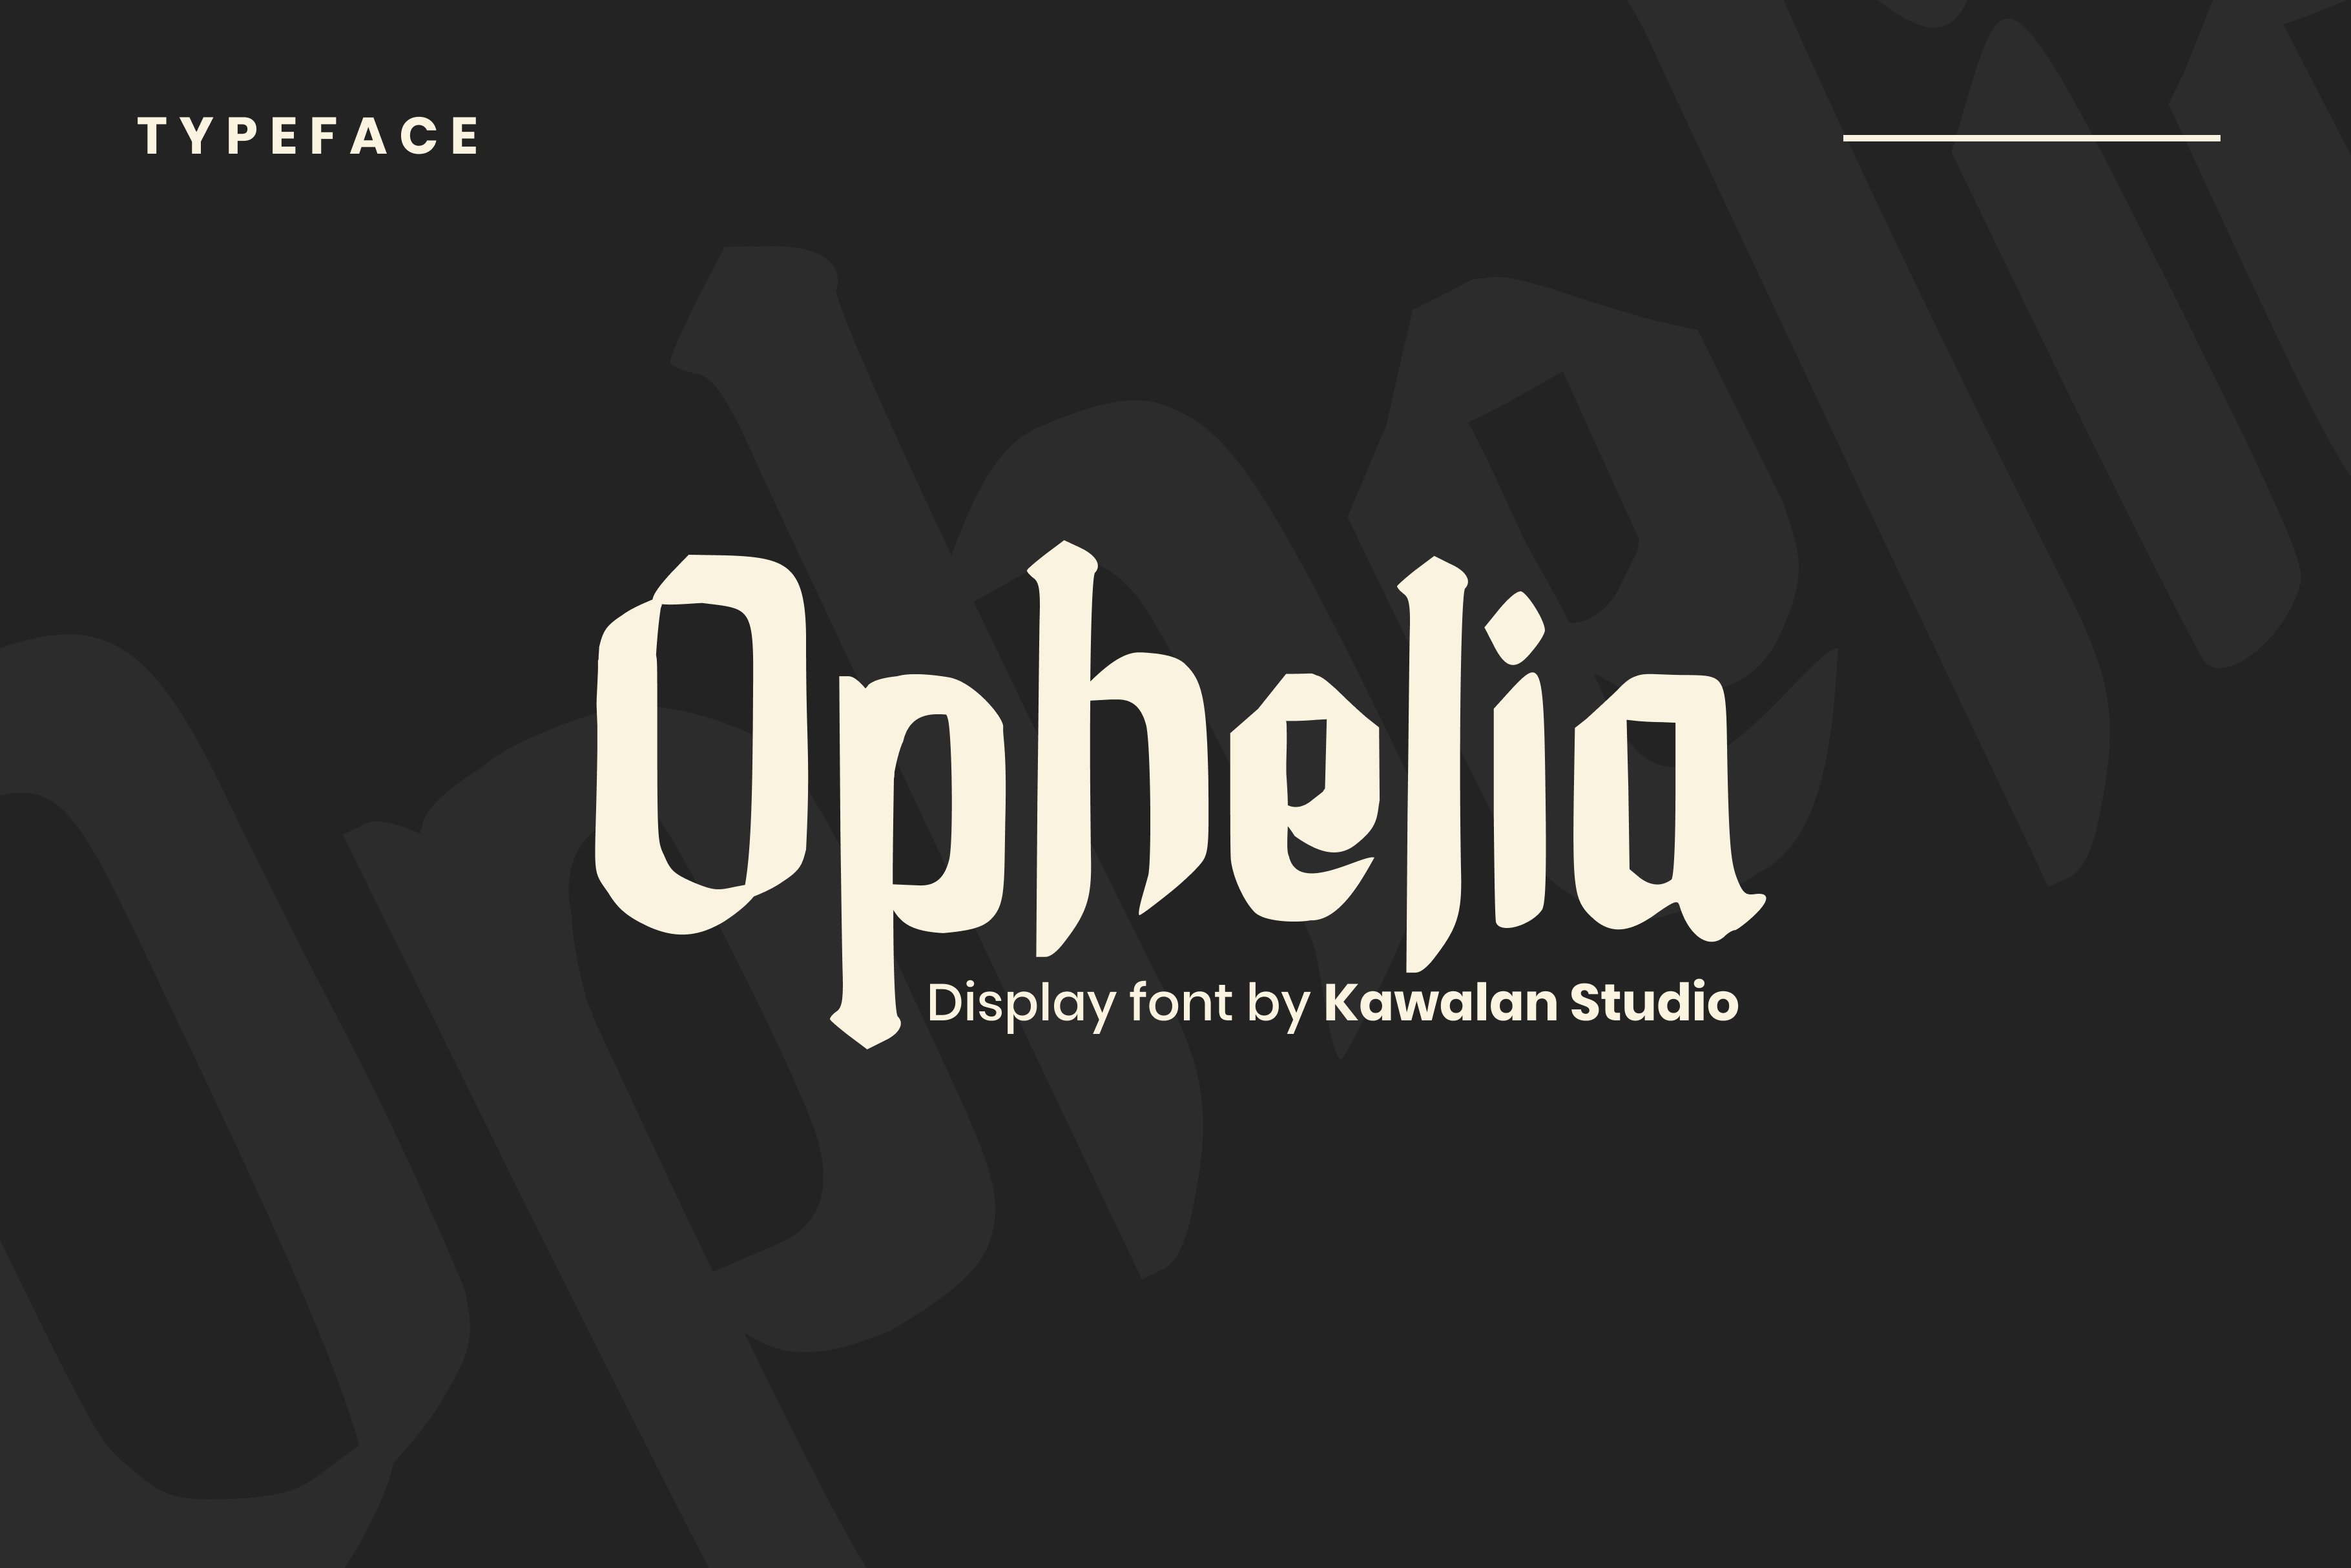 Ophelia | Display Font cover image.